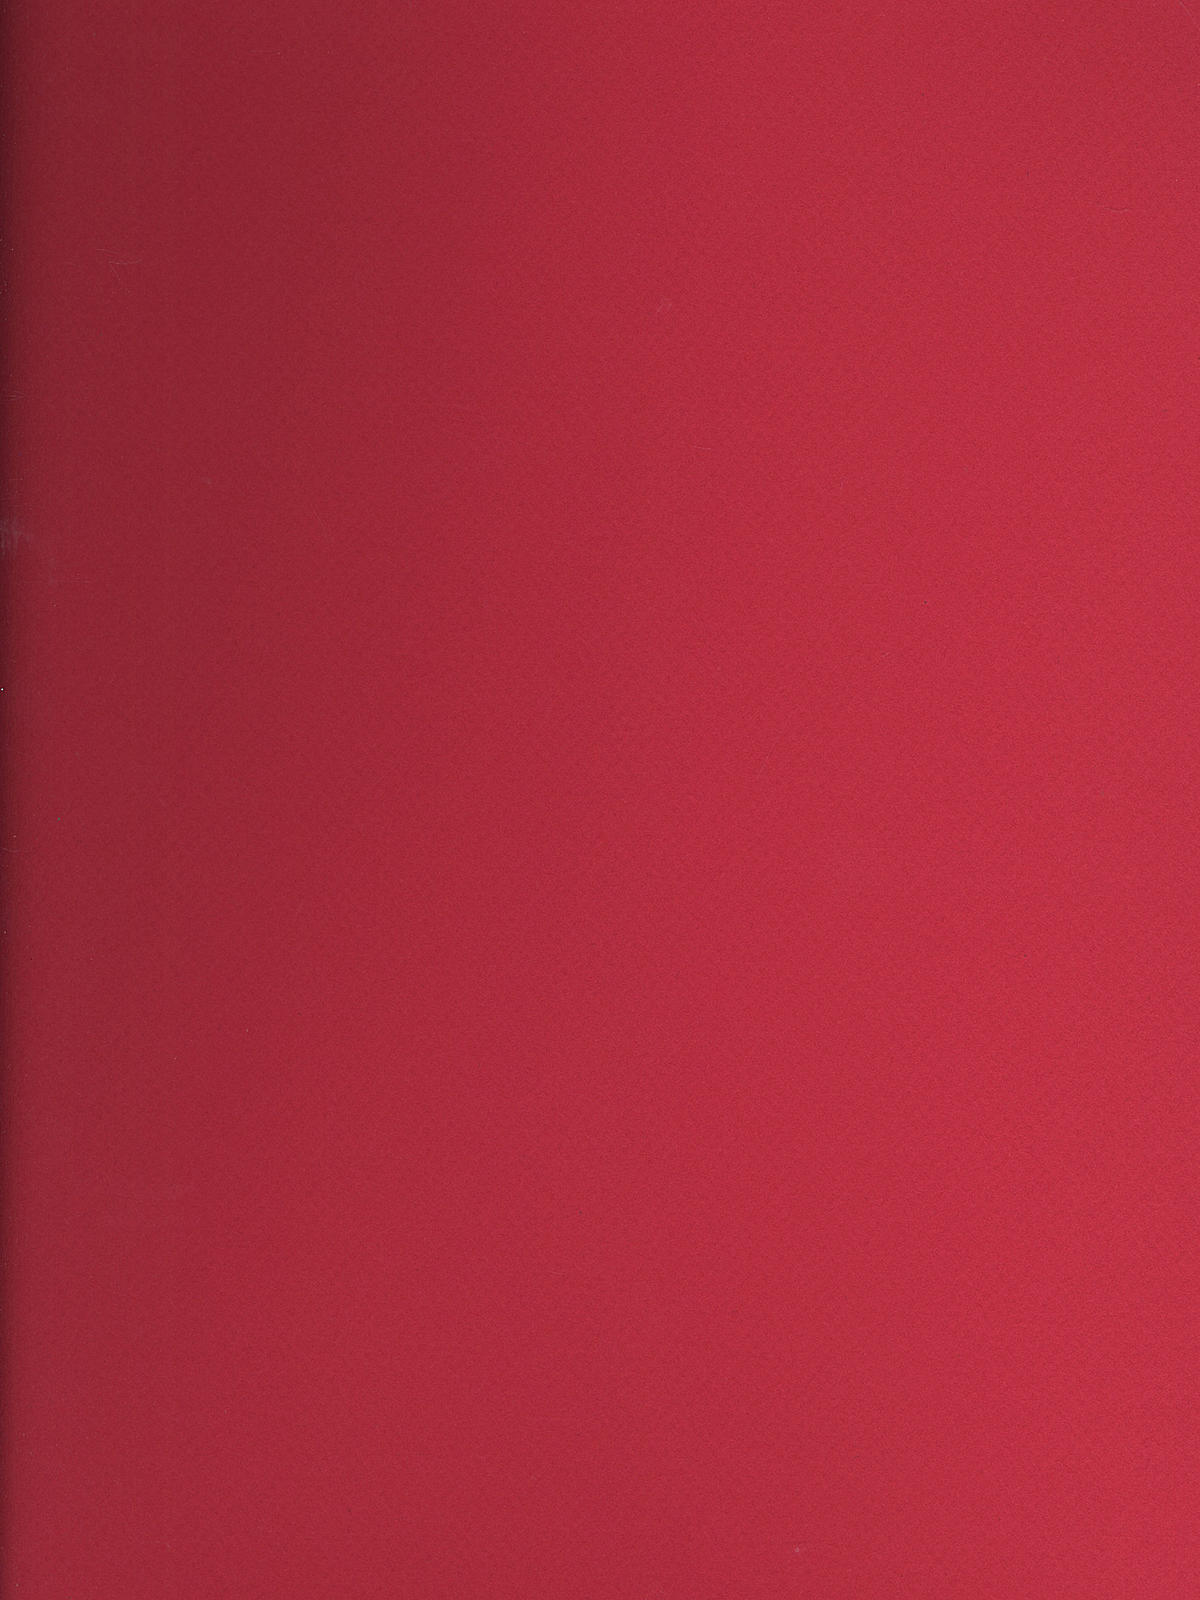 Mi-teintes Tinted Paper Red 19 In. X 25 In.